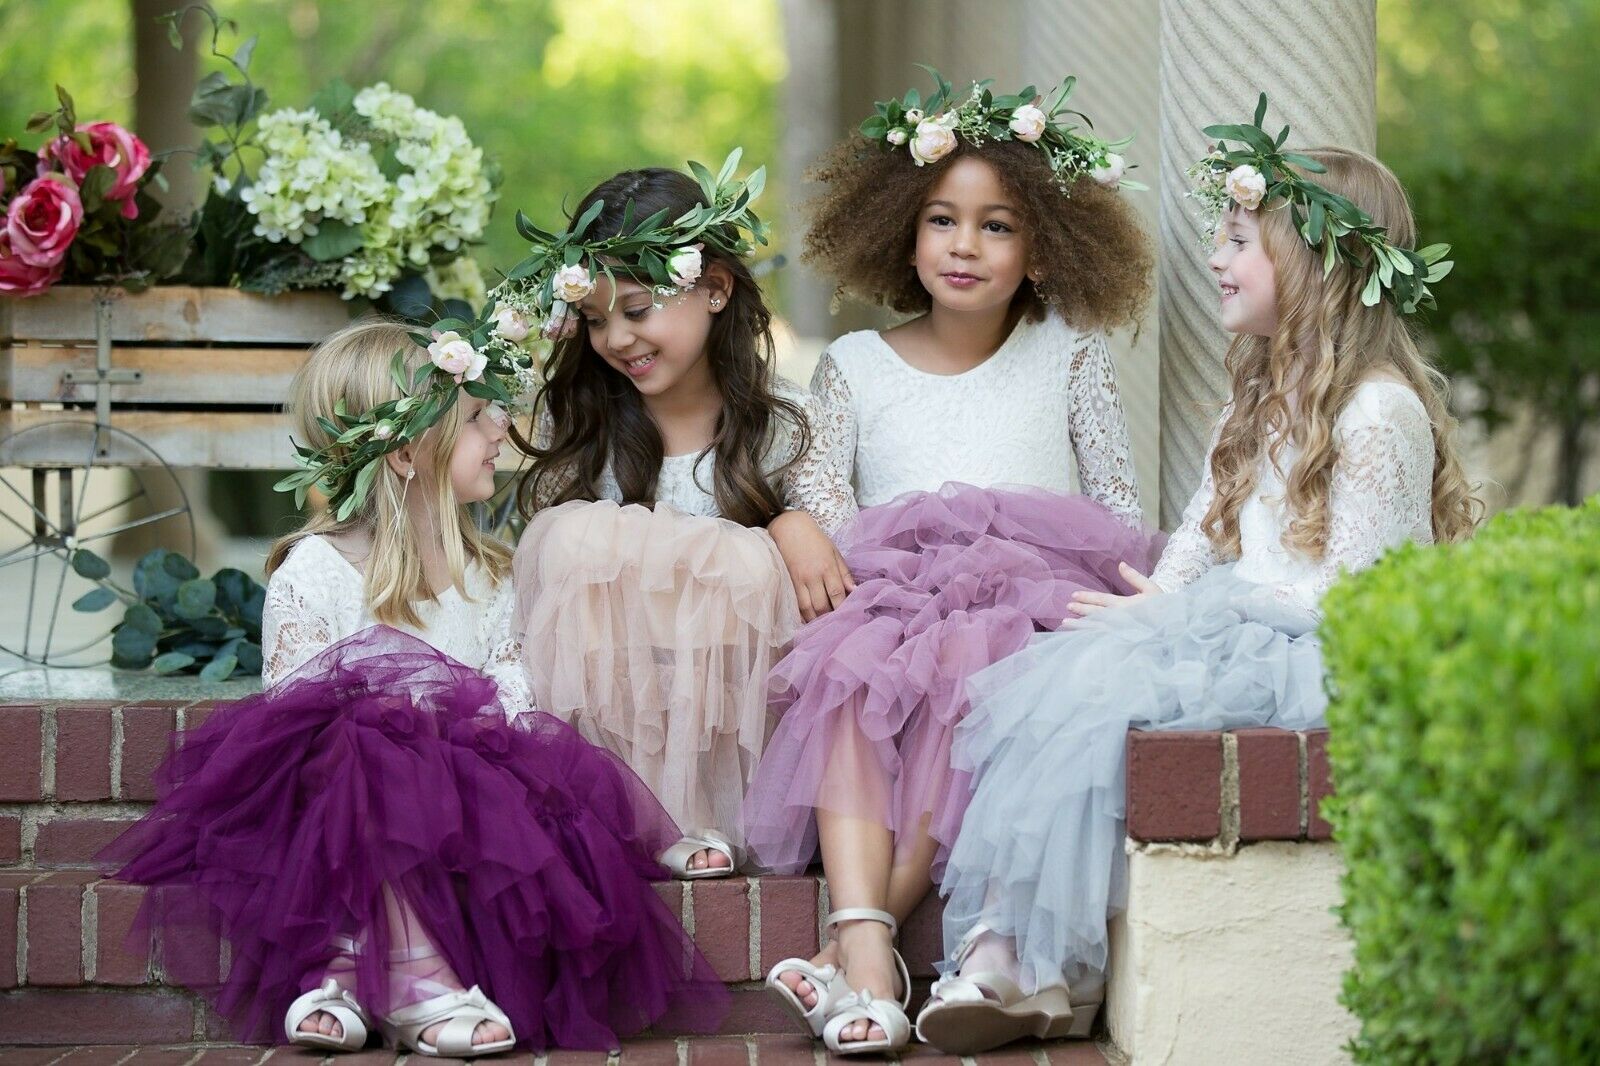 group of 4 girls sitting in dresses with various coloured ruffle skirts, with natural green foliage and rose head garlands